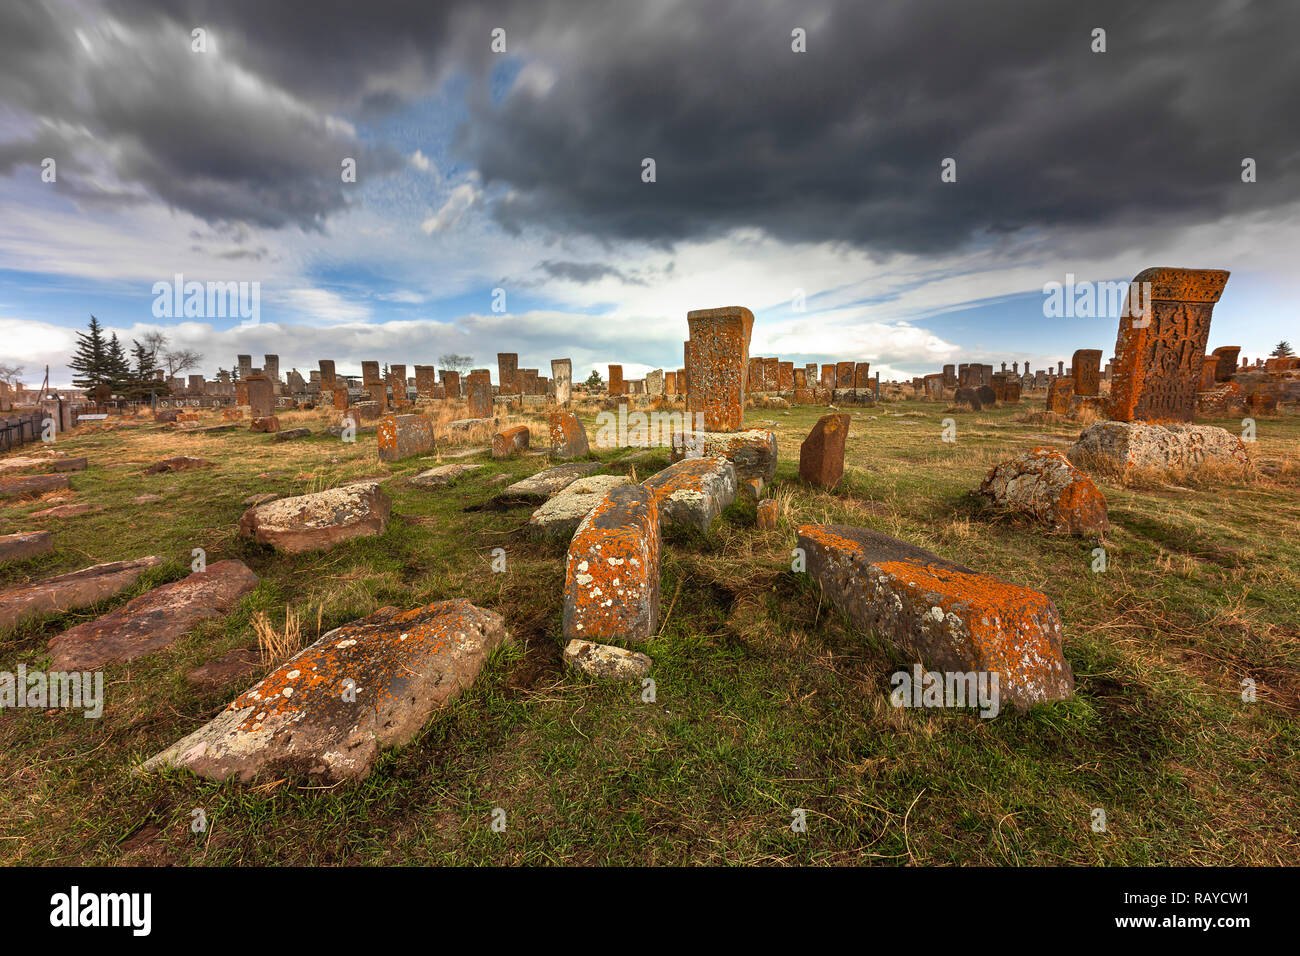 Ancient tombs and headtsones in the historical cemetery of Noratus in Armenia. Stock Photo